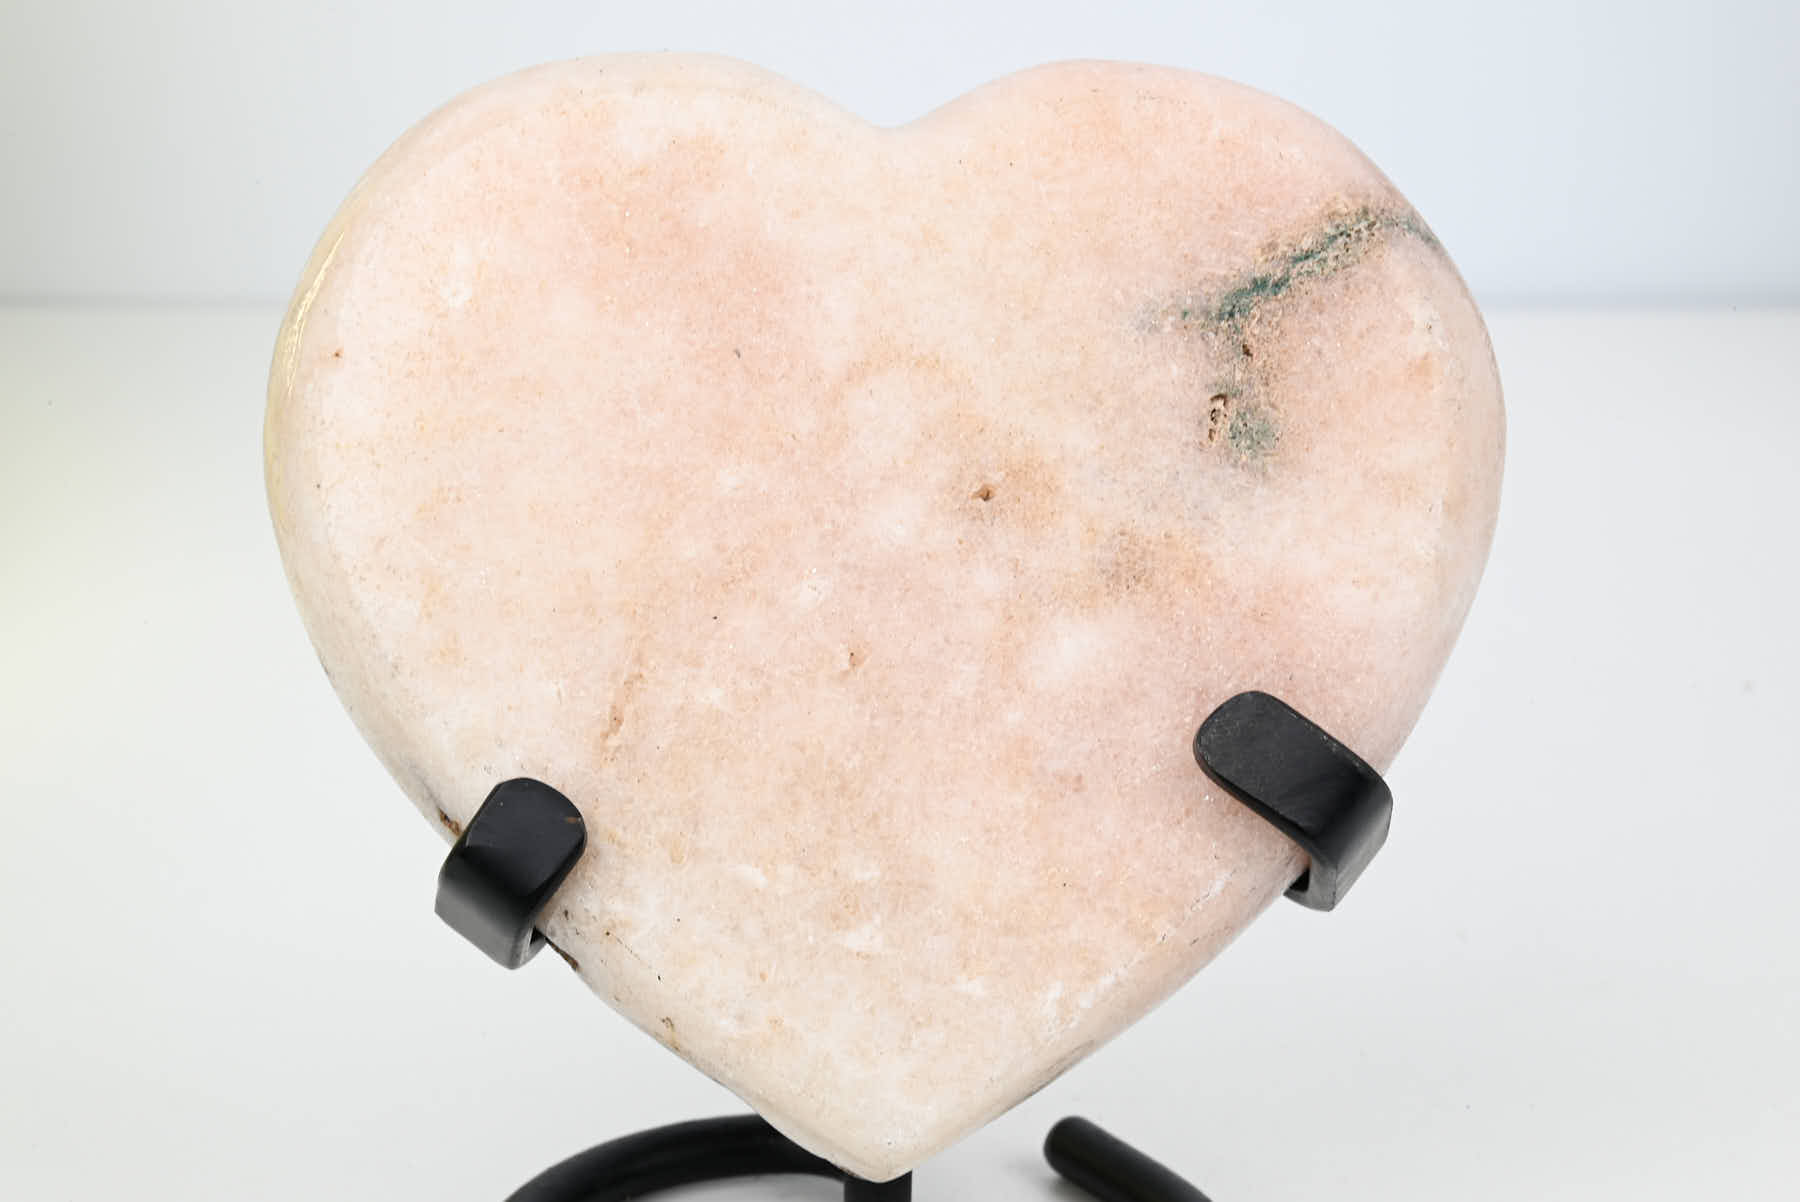 Extra Quality Pink Amethyst Heart - 0.84kg, 13cm high - #HTPINK-34027